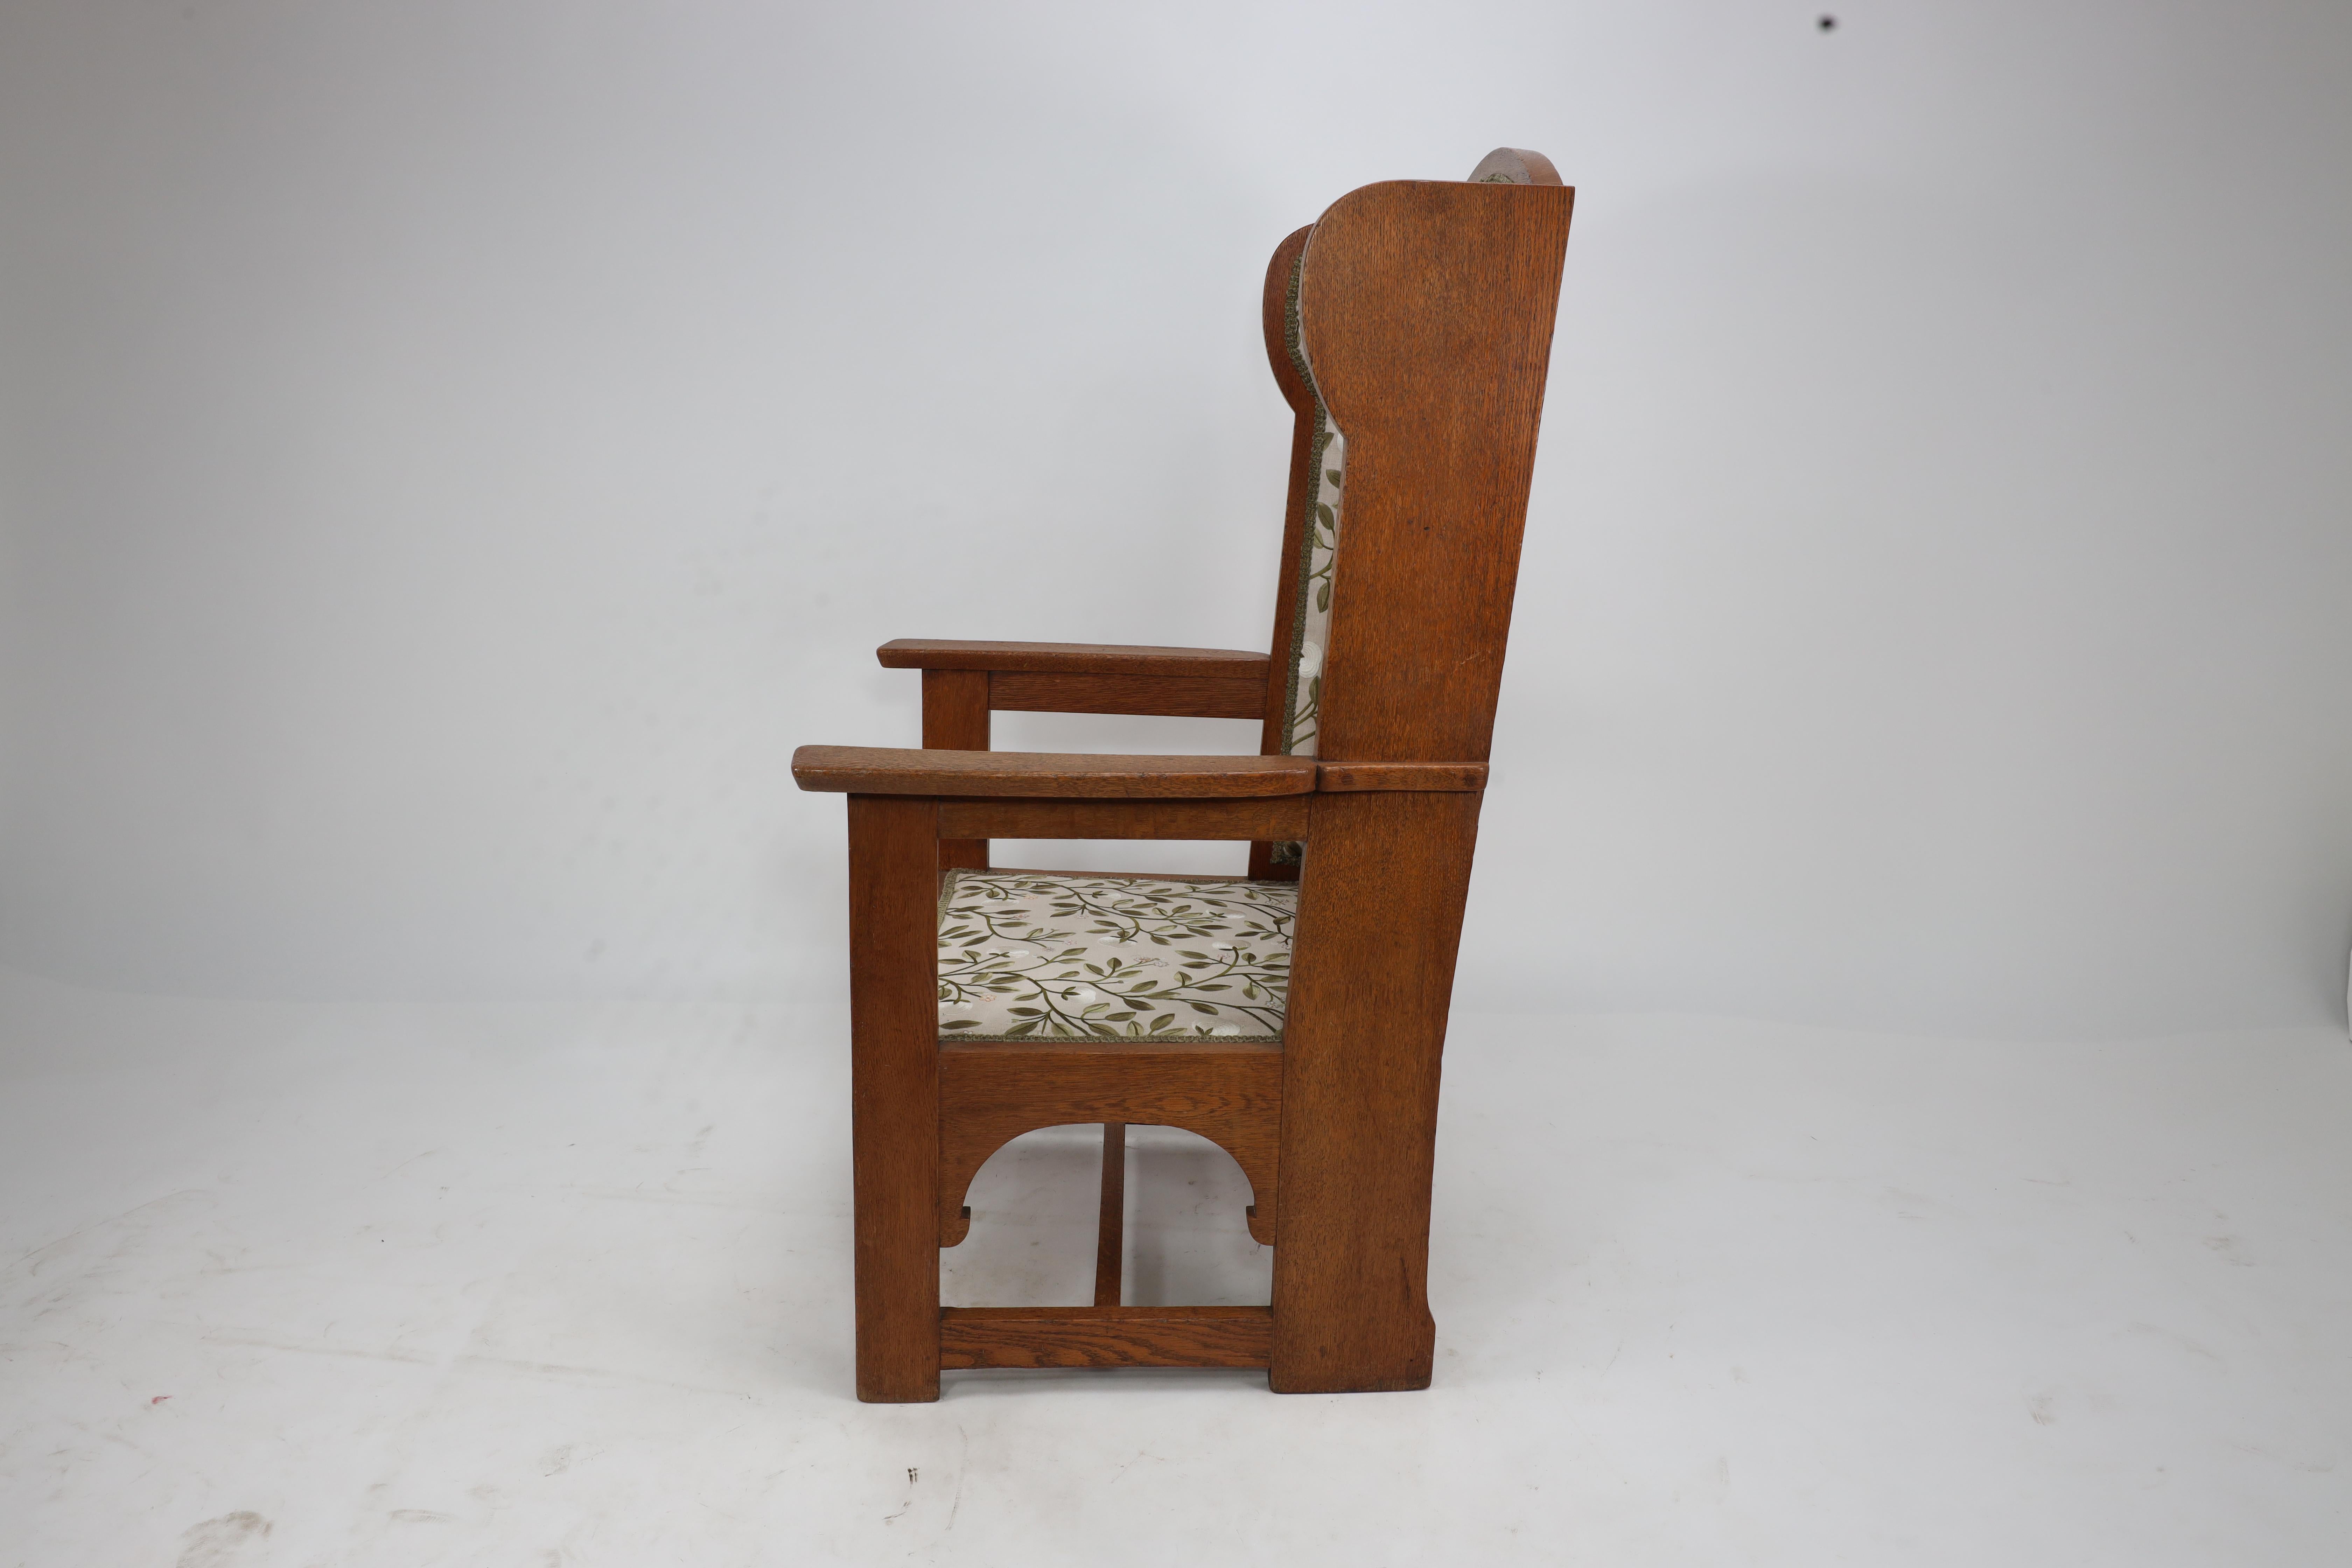 English E G Punnet attributed. Probably made by William Birch. An oak wing back armchair For Sale